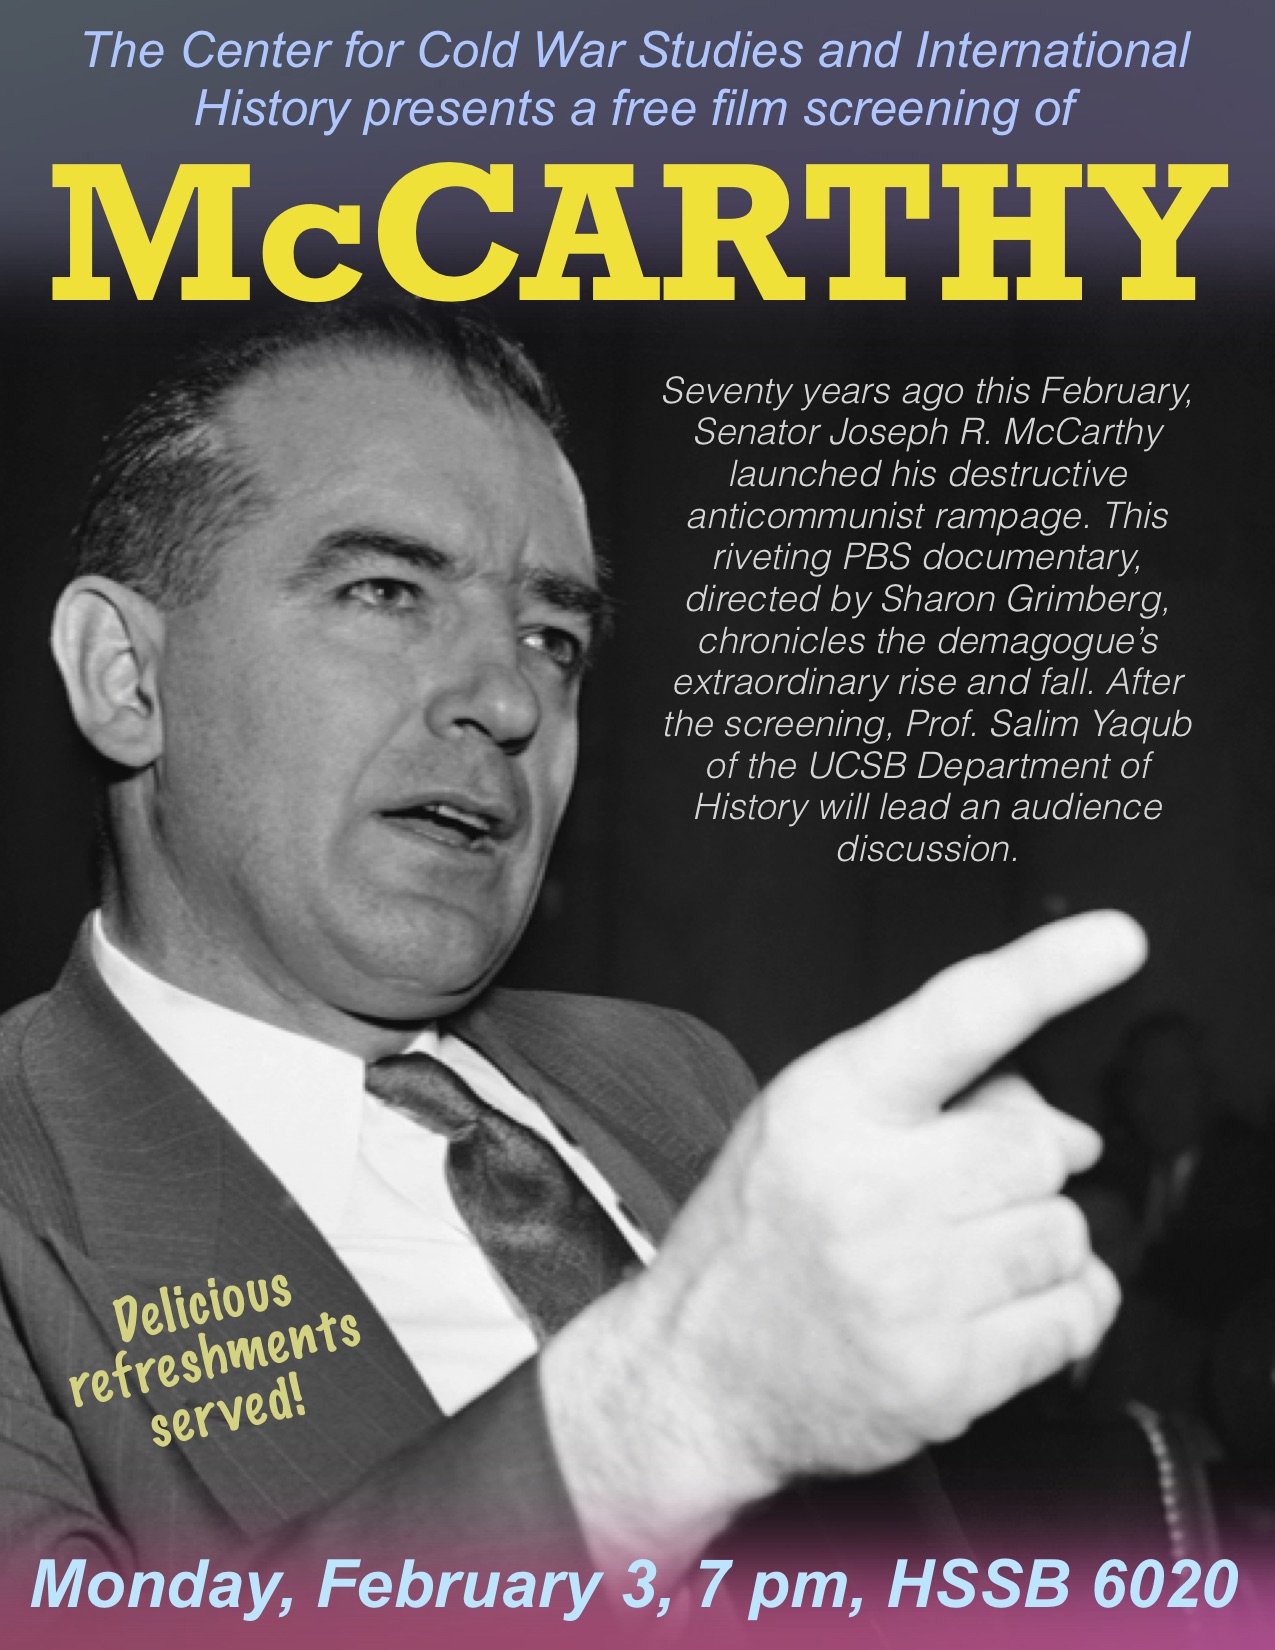 Poster for CCWS film screening of PBS documentary "McCarthy."